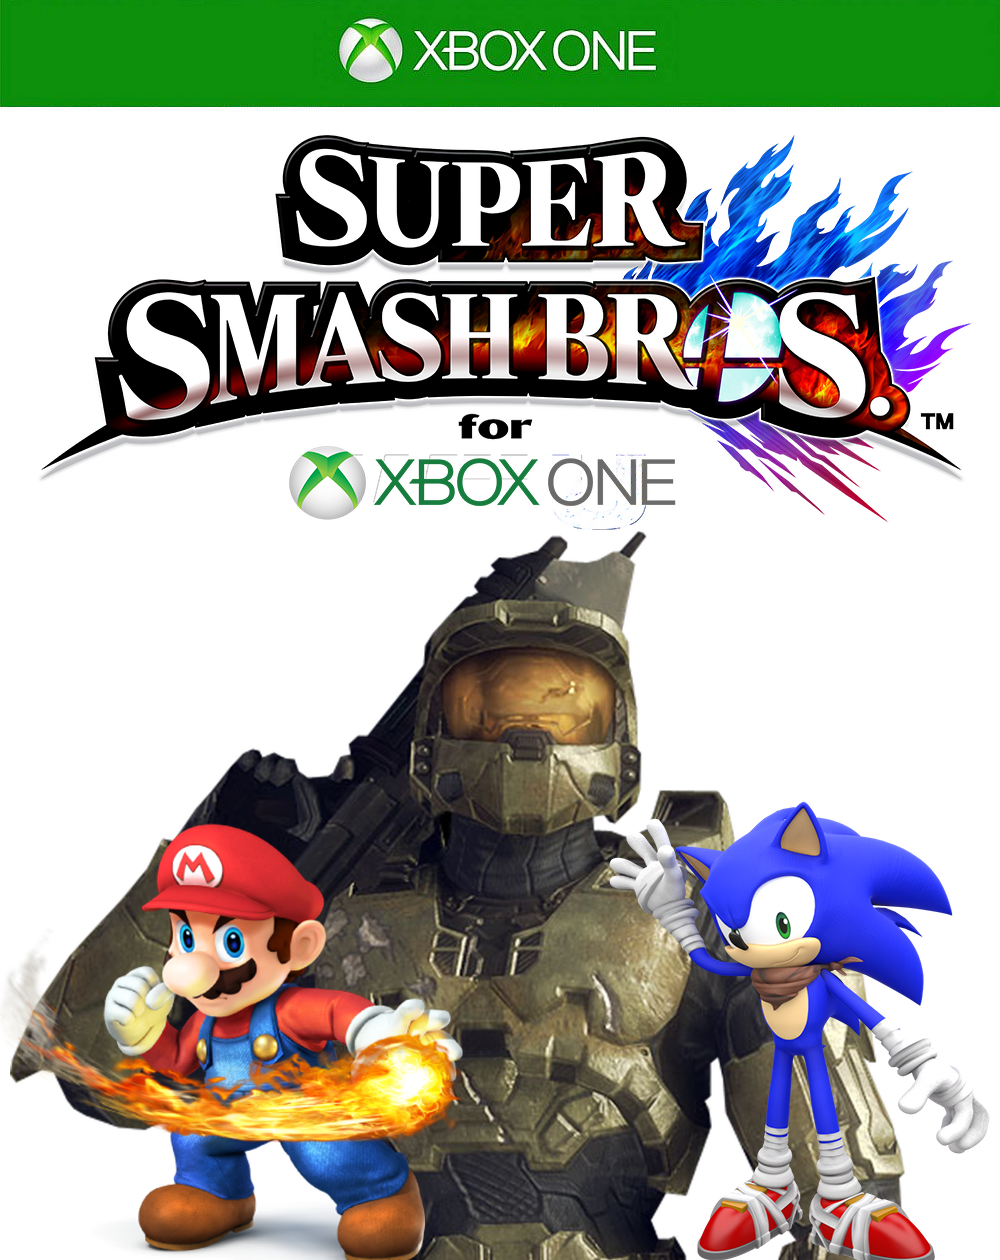 Games to Play If You Like Super Smash Bros.